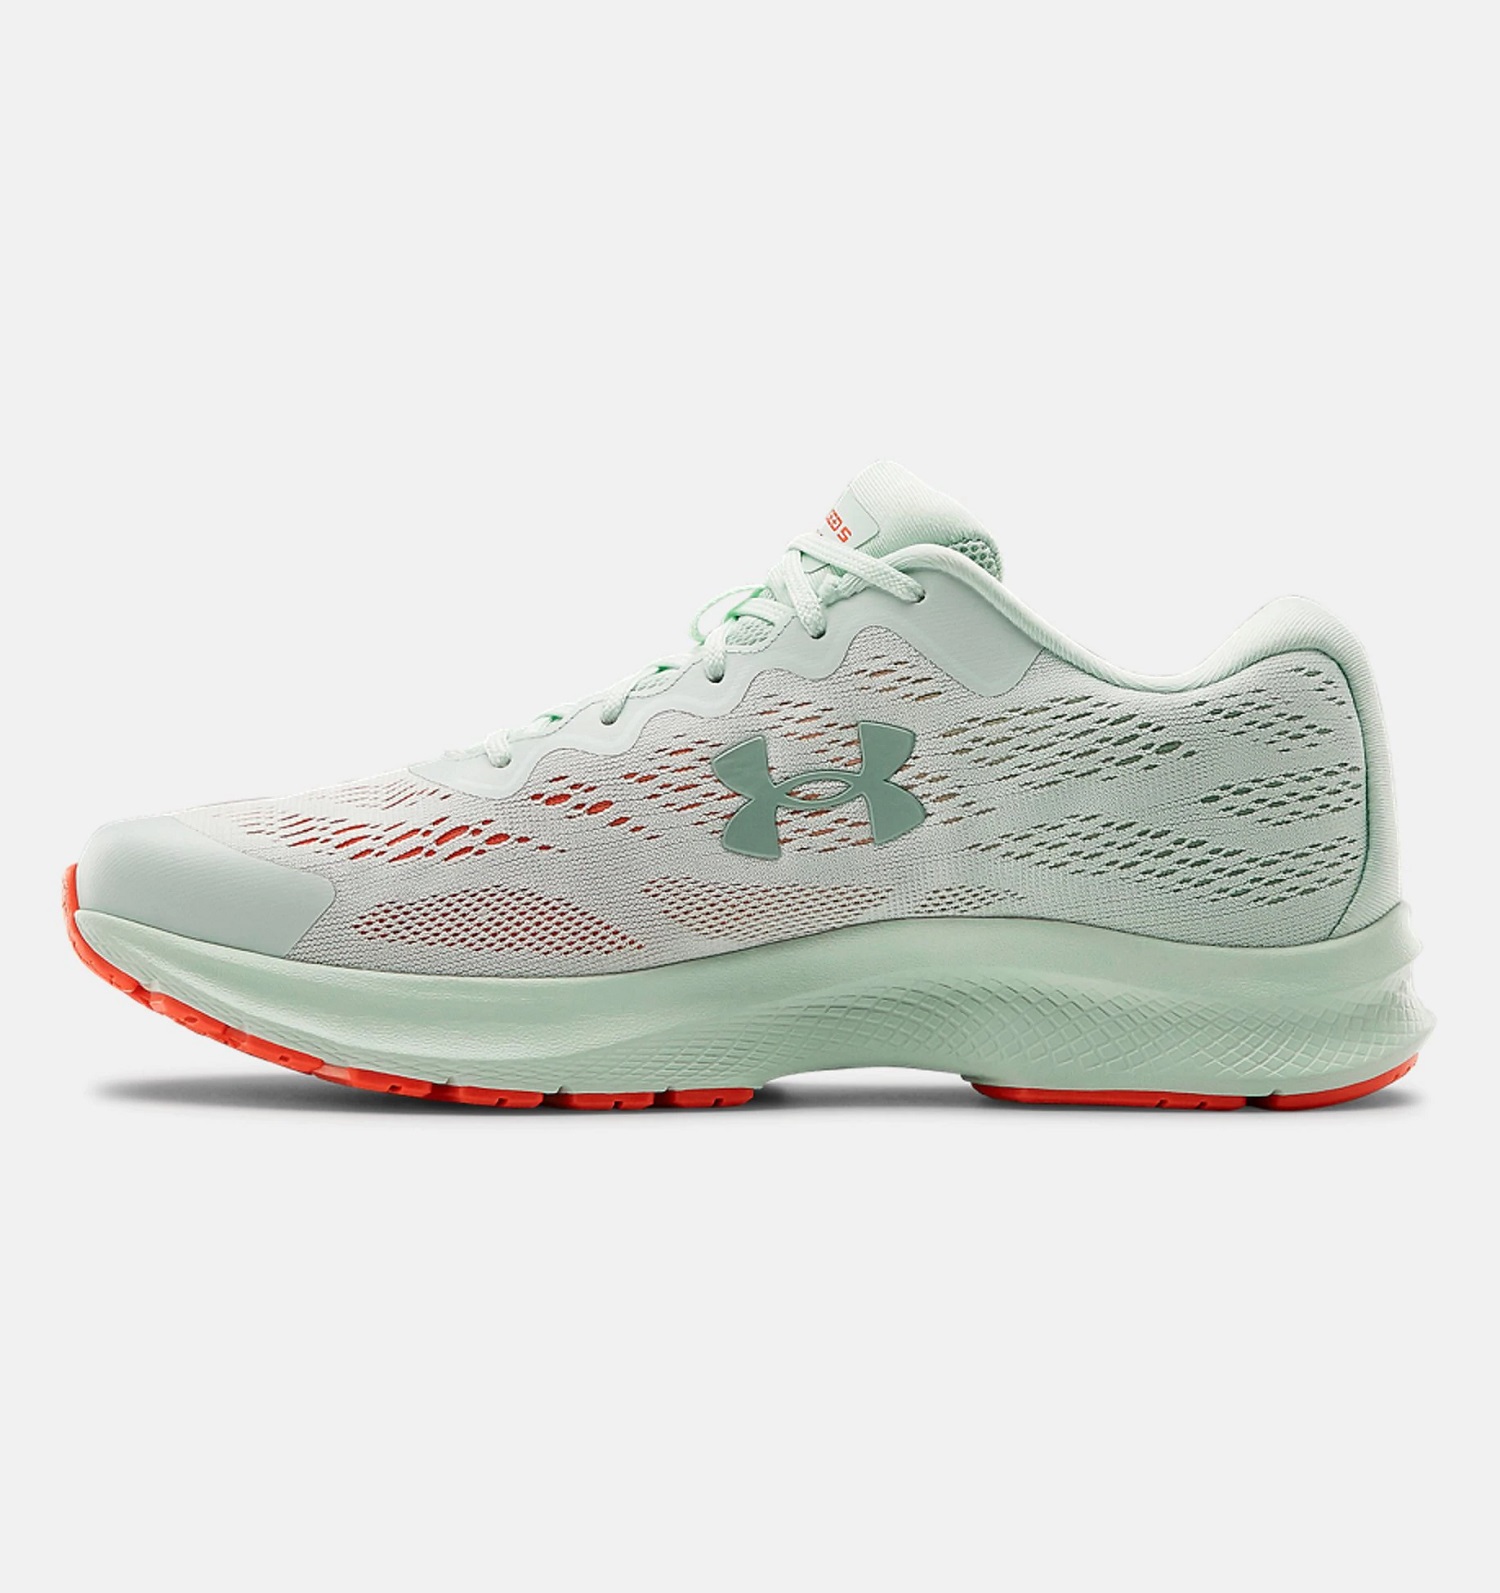 Under Armour Women's UA Charged Bandit 6 Running Shoes | eBay